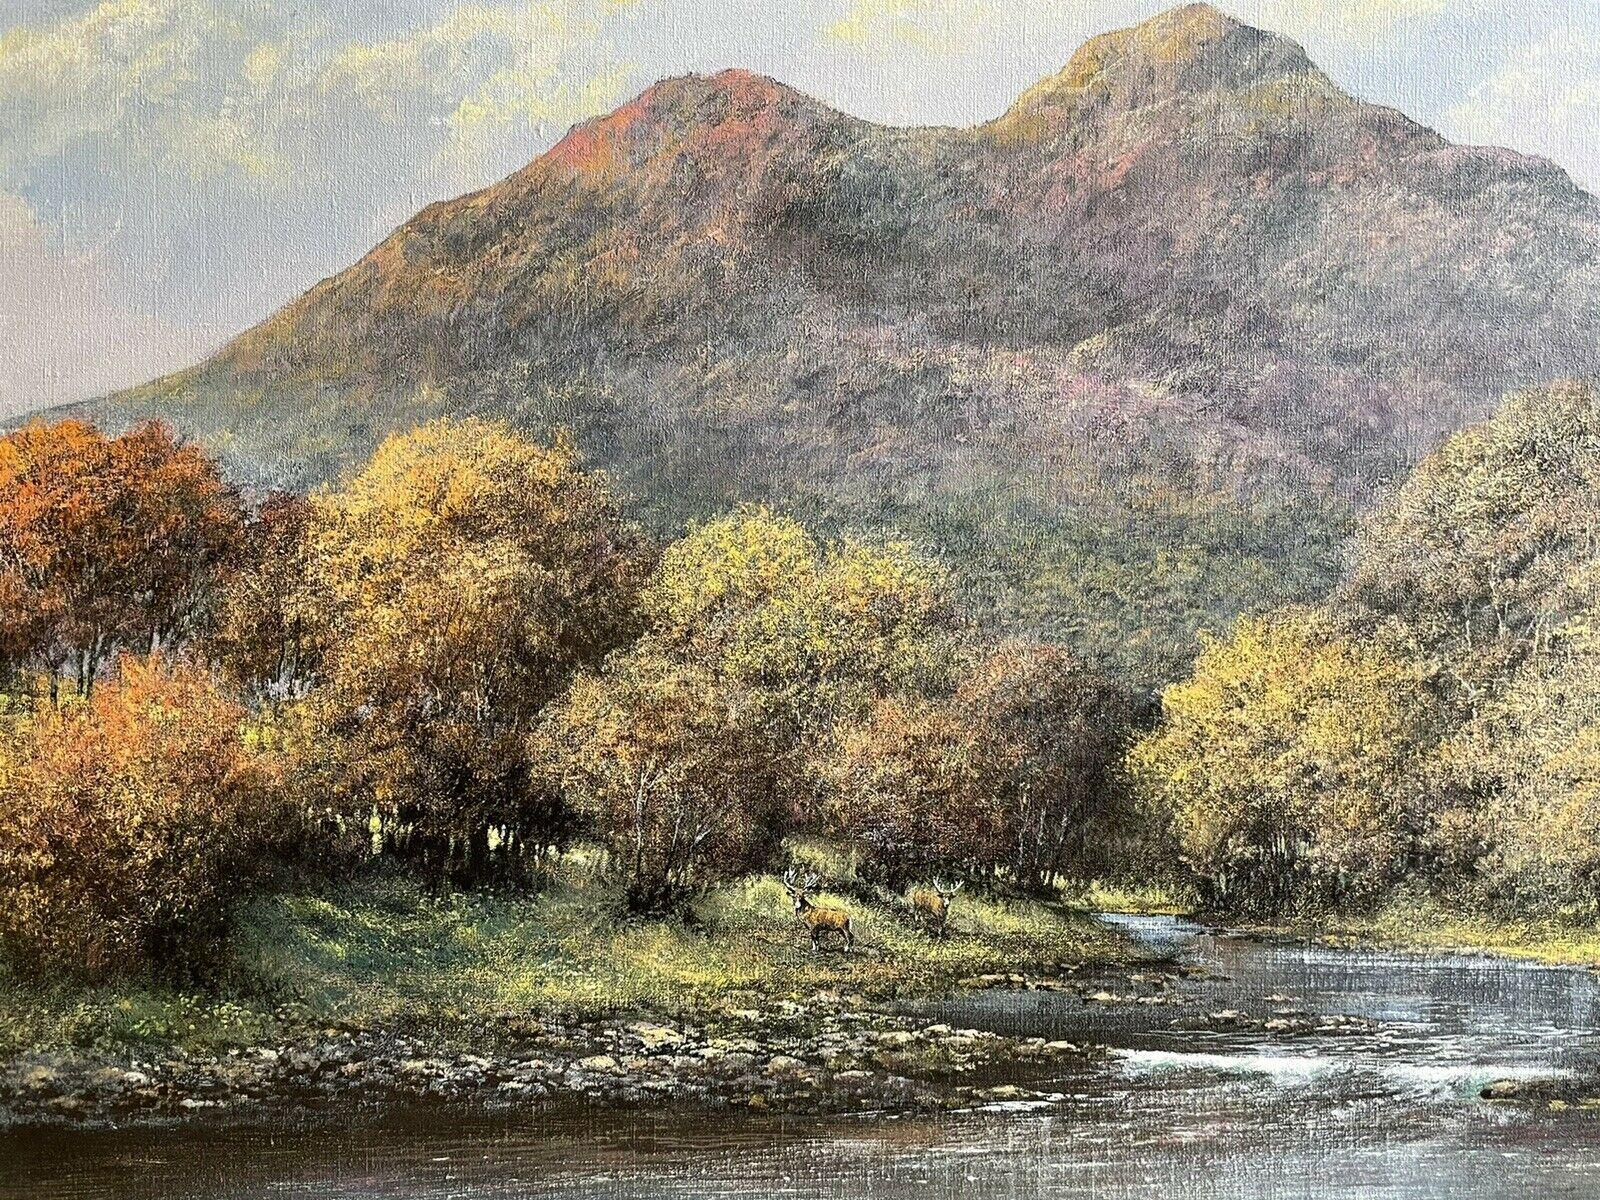 CLIVE MADGWICK (1934-2005) SIGNED OIL - STAGS SCOTTISH HIGHLAND RIVER LANDSCAPE - Impressionist Painting by Clive Madgwick